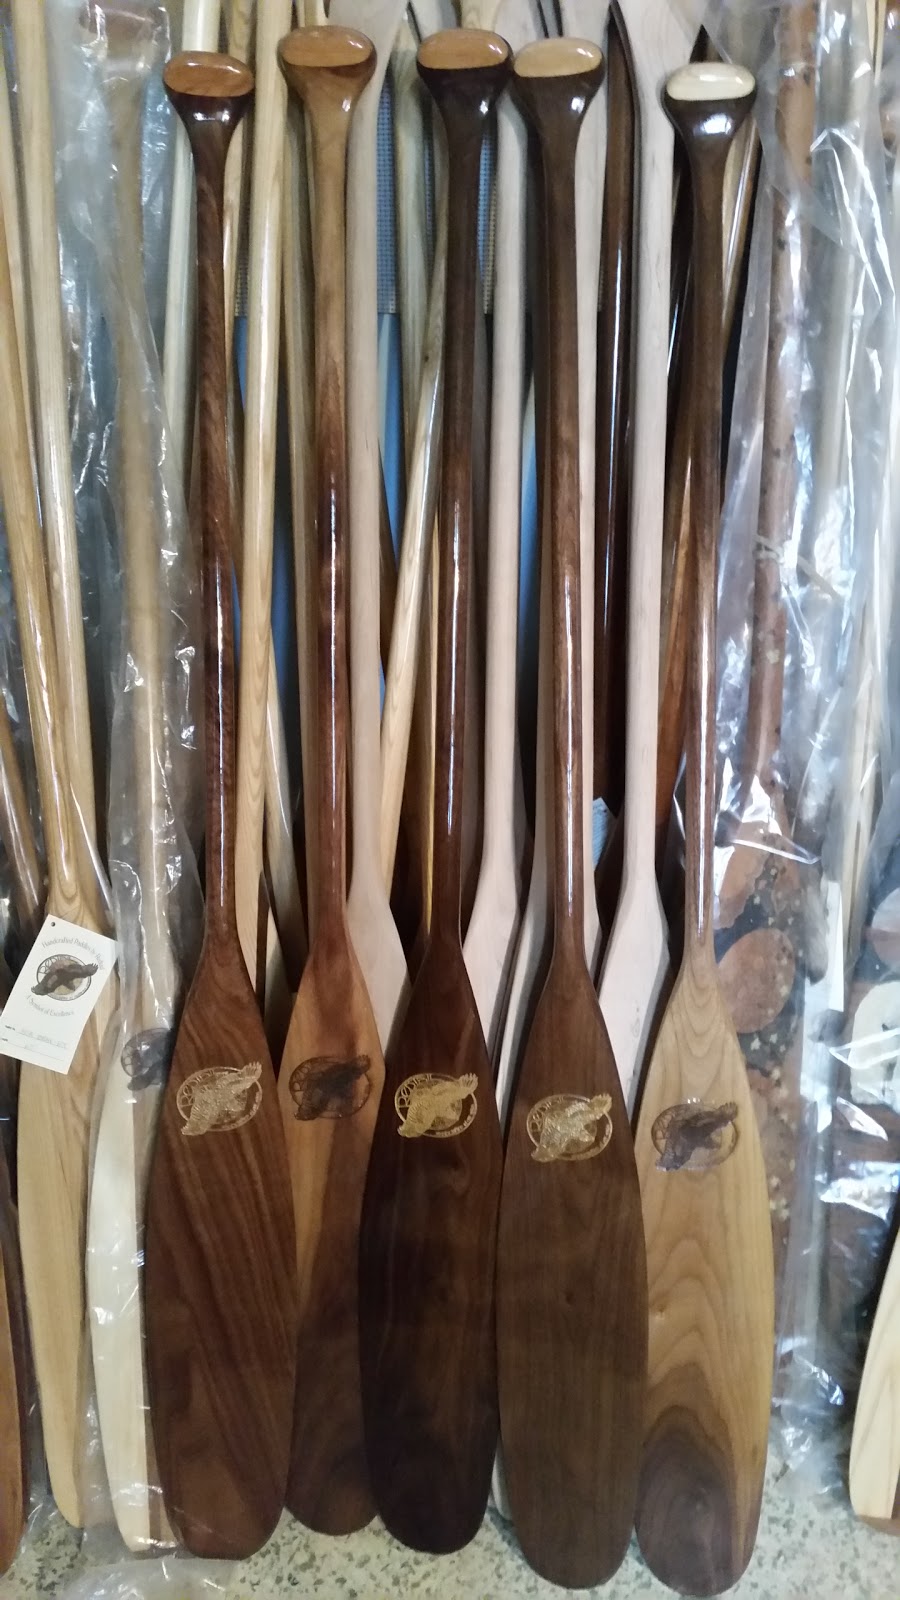 Redtail Paddle Company | store | 74 Rylstone Rd, Campbellford, ON K0L 1L0, Canada | 7057683693 OR +1 705-768-3693